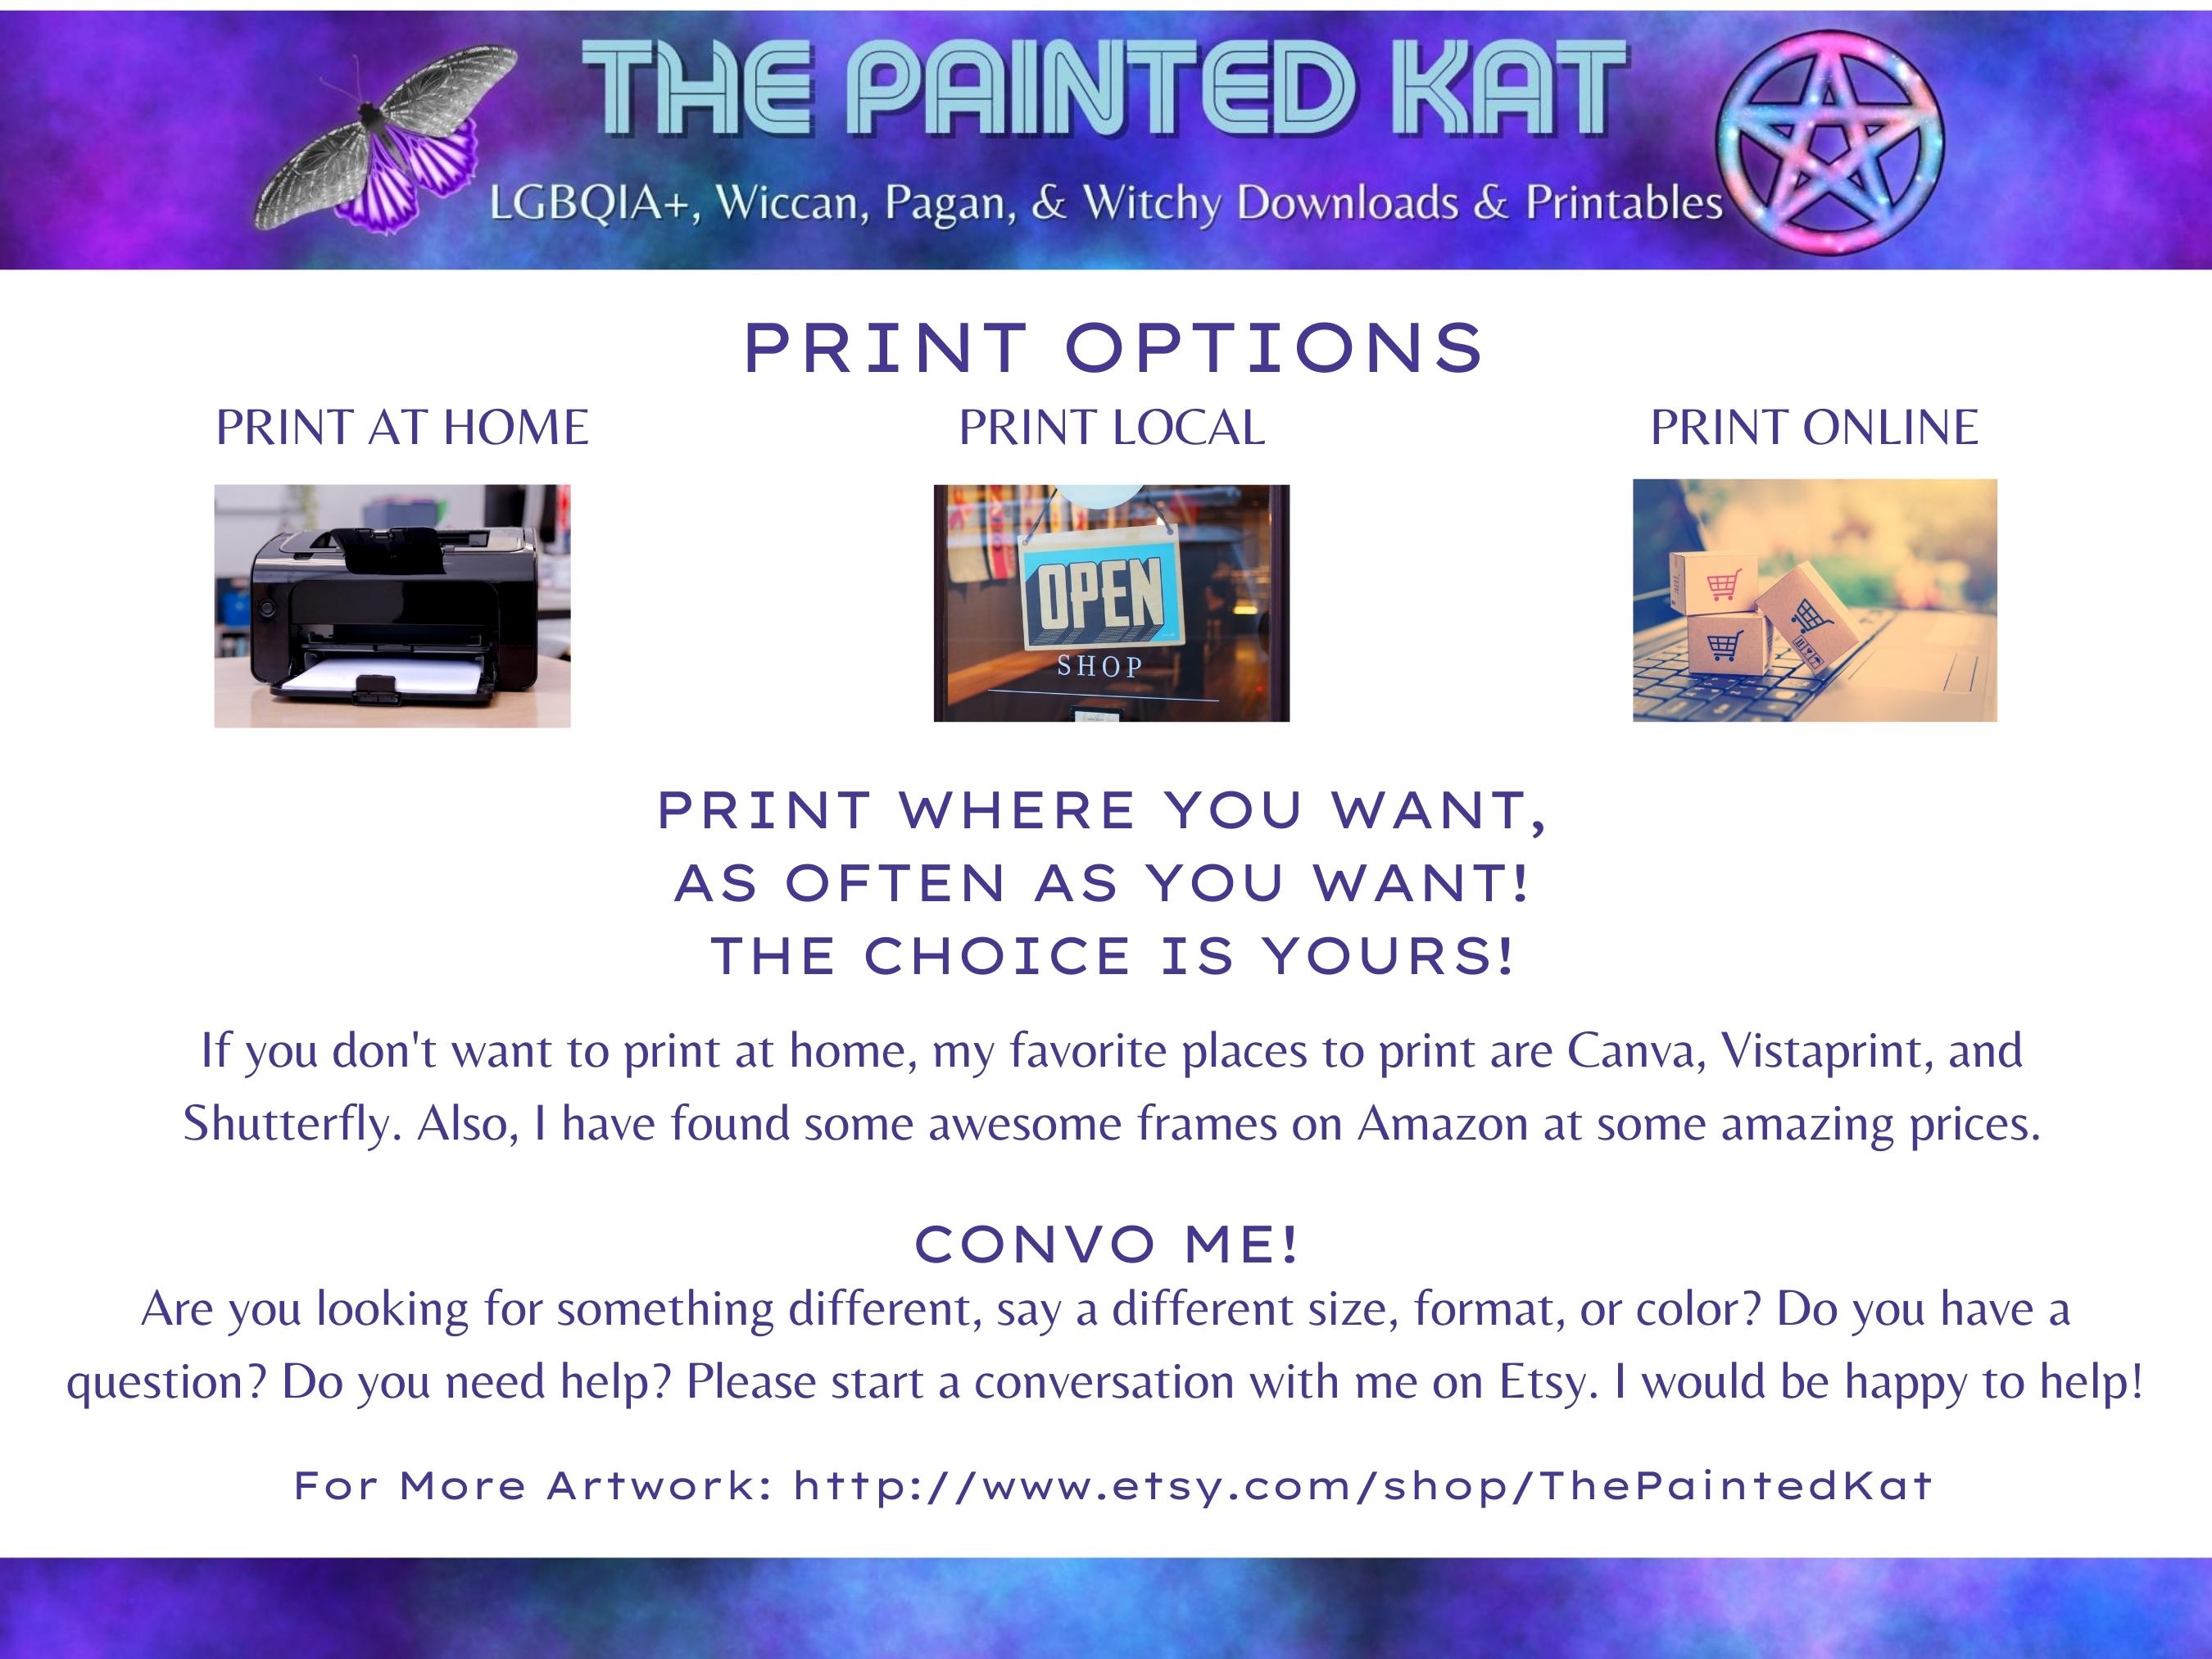 Print Options - How to print your digital artwork